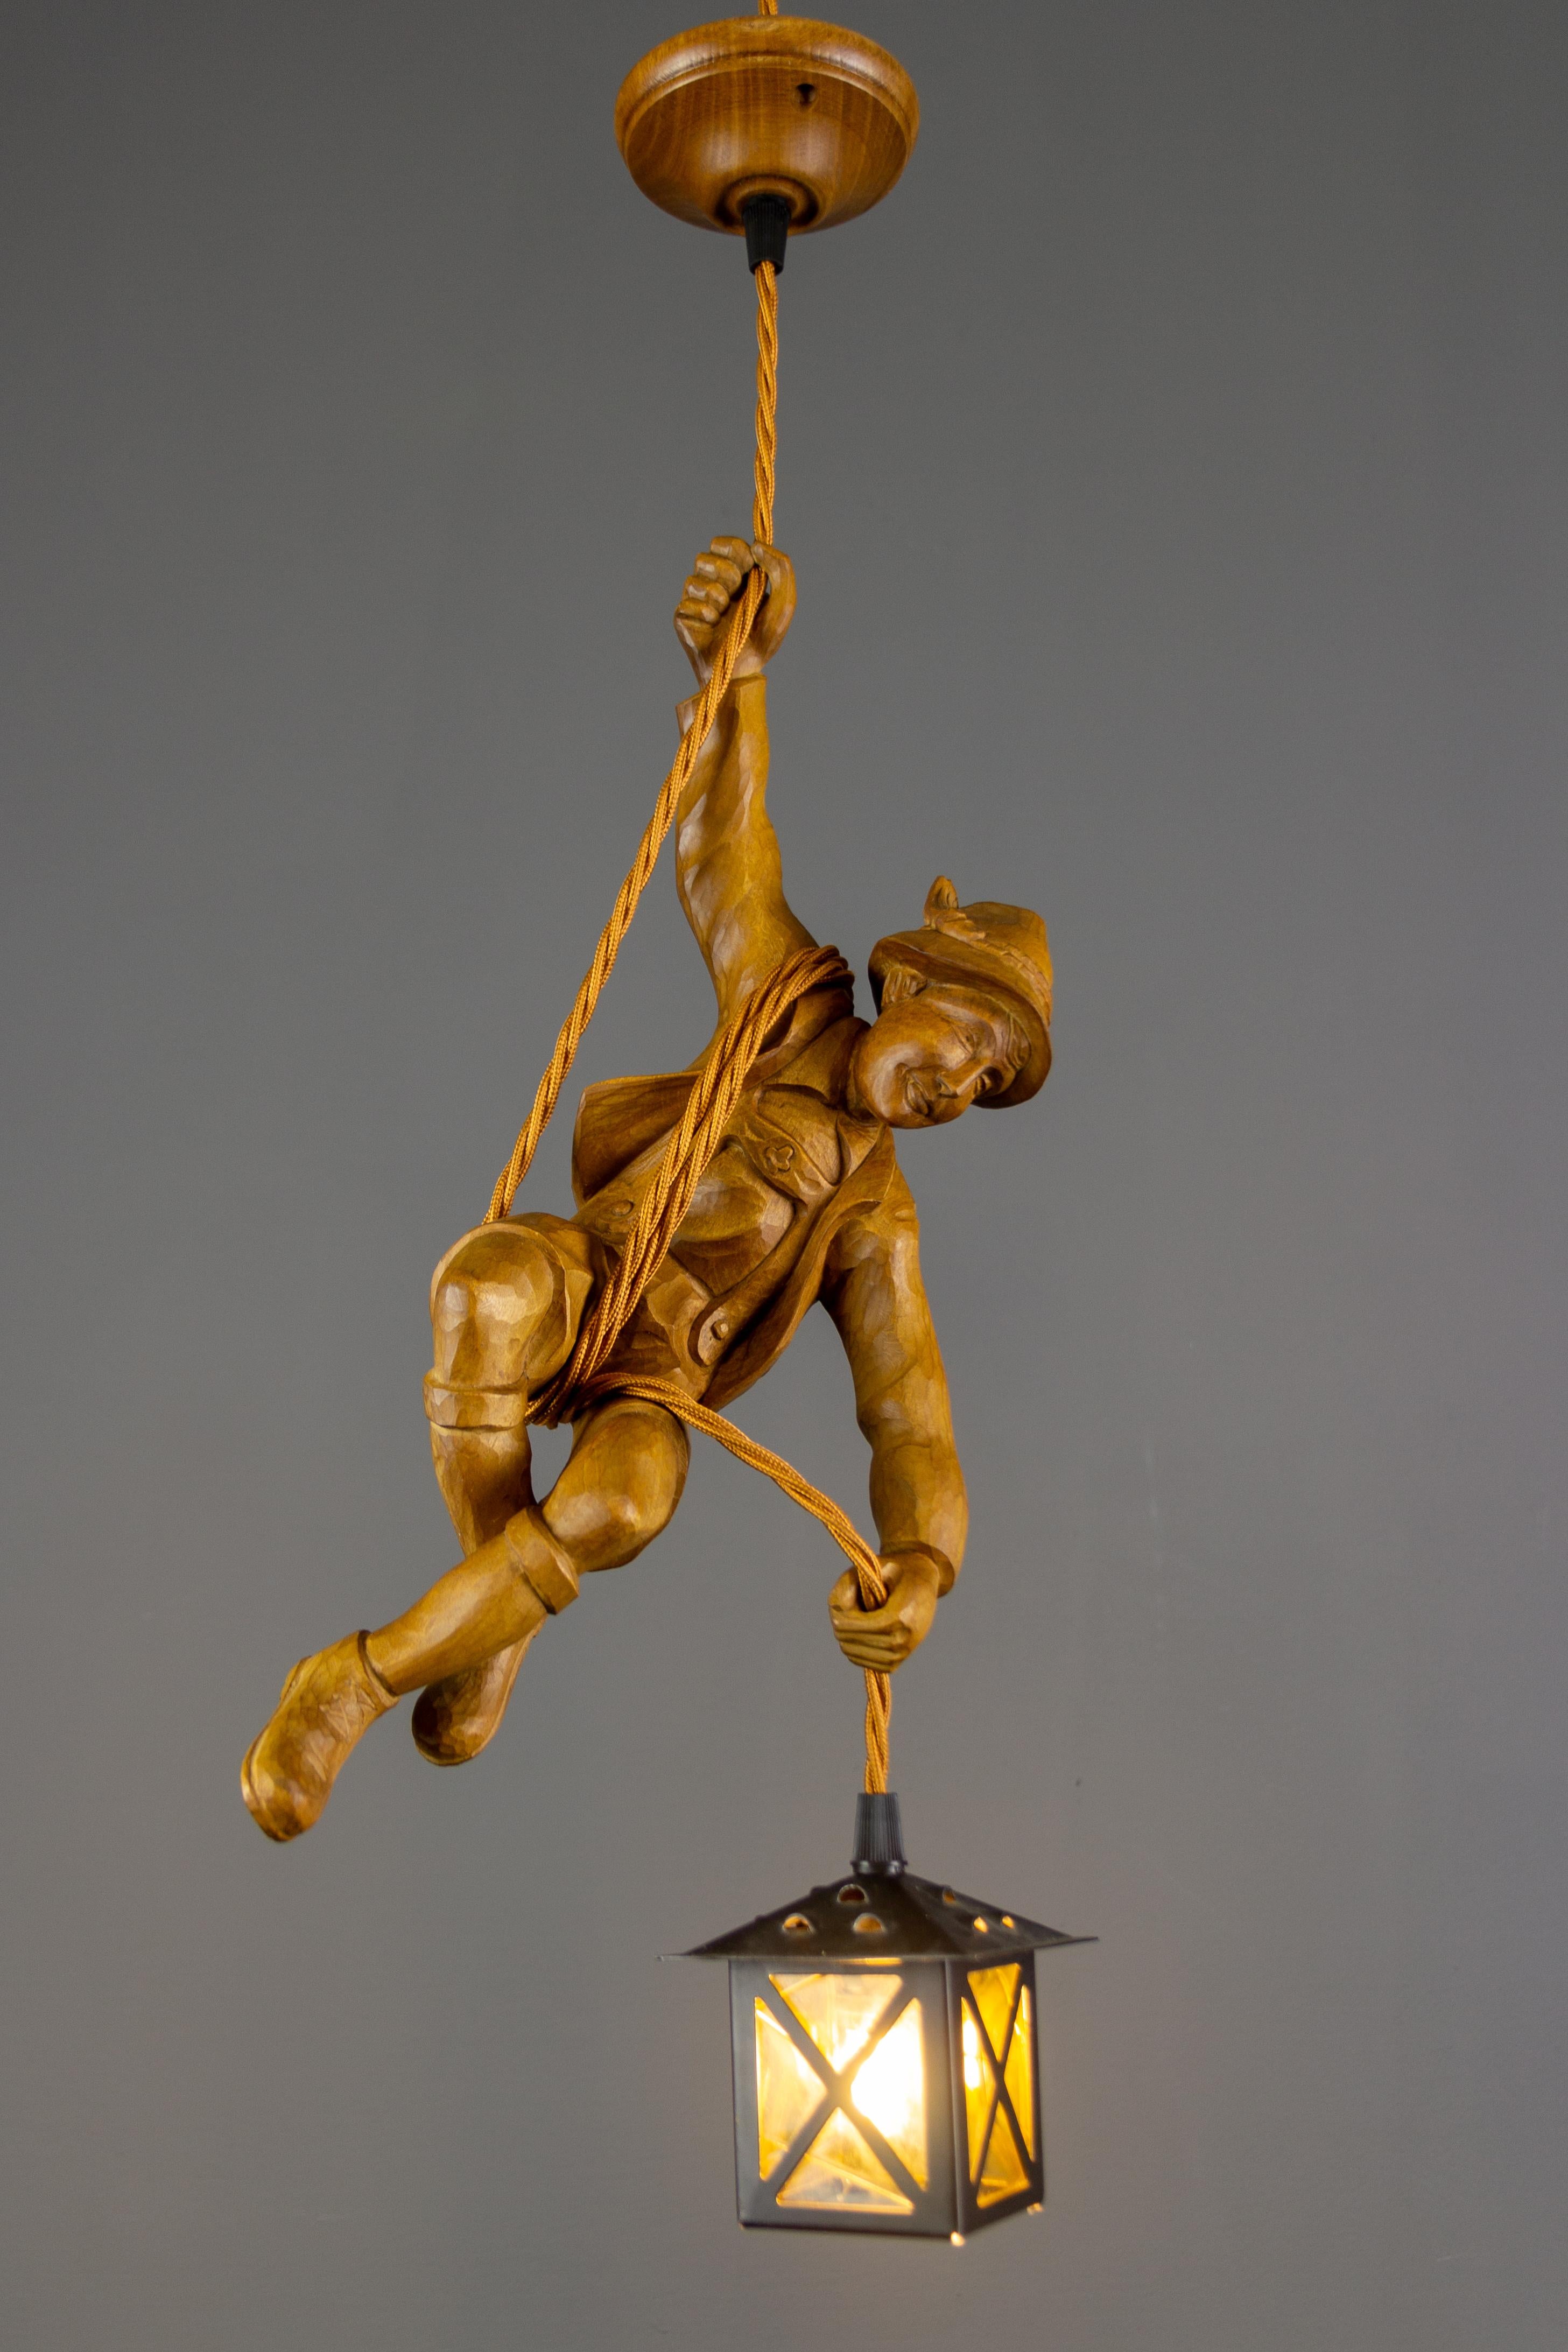 Wonderful German figural pendant lamp features a hand carved figure of a smiling mountain climber. The detailed carved wooden mountaineer is holding onto a rope and holding metal and yellow glass lantern in one hand.
The height of the pendant lamp